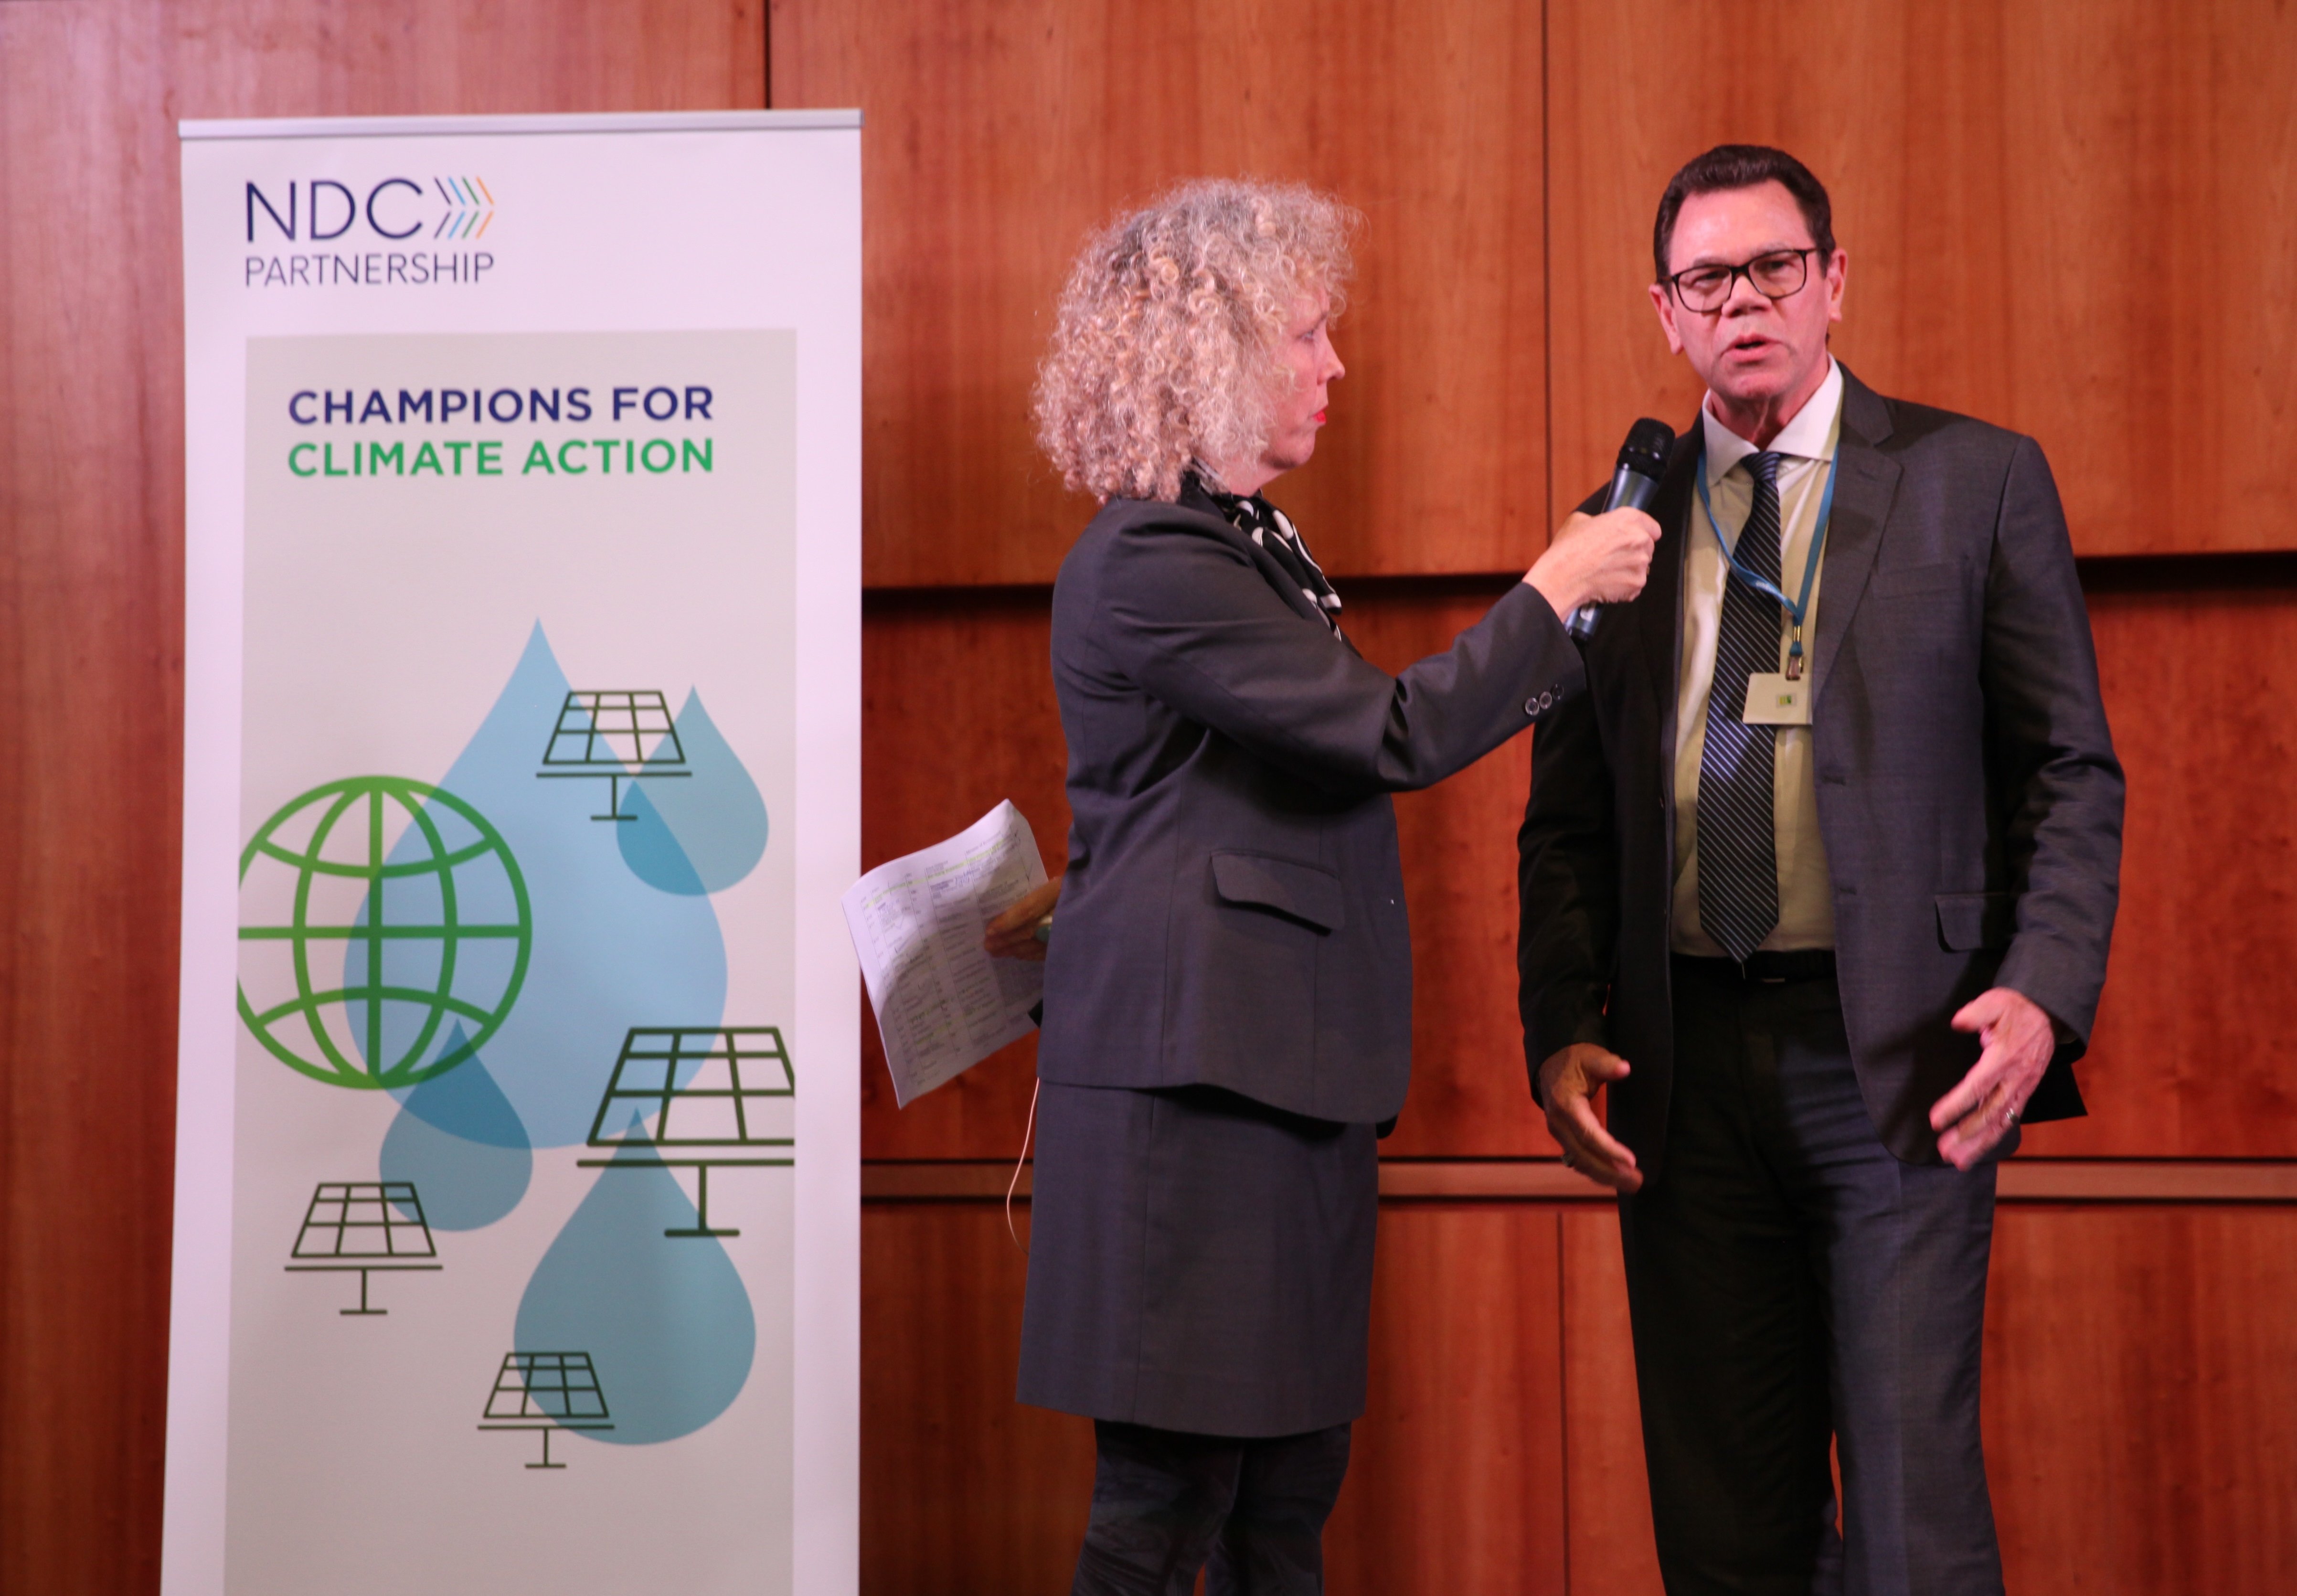 President Smith (right) discusses CDB’s decision to join the NDC Partnership with moderator, Jennifer Morgan (left) at the Champions for Climate Action event on November 14, 2017 in Bonn, Germany.